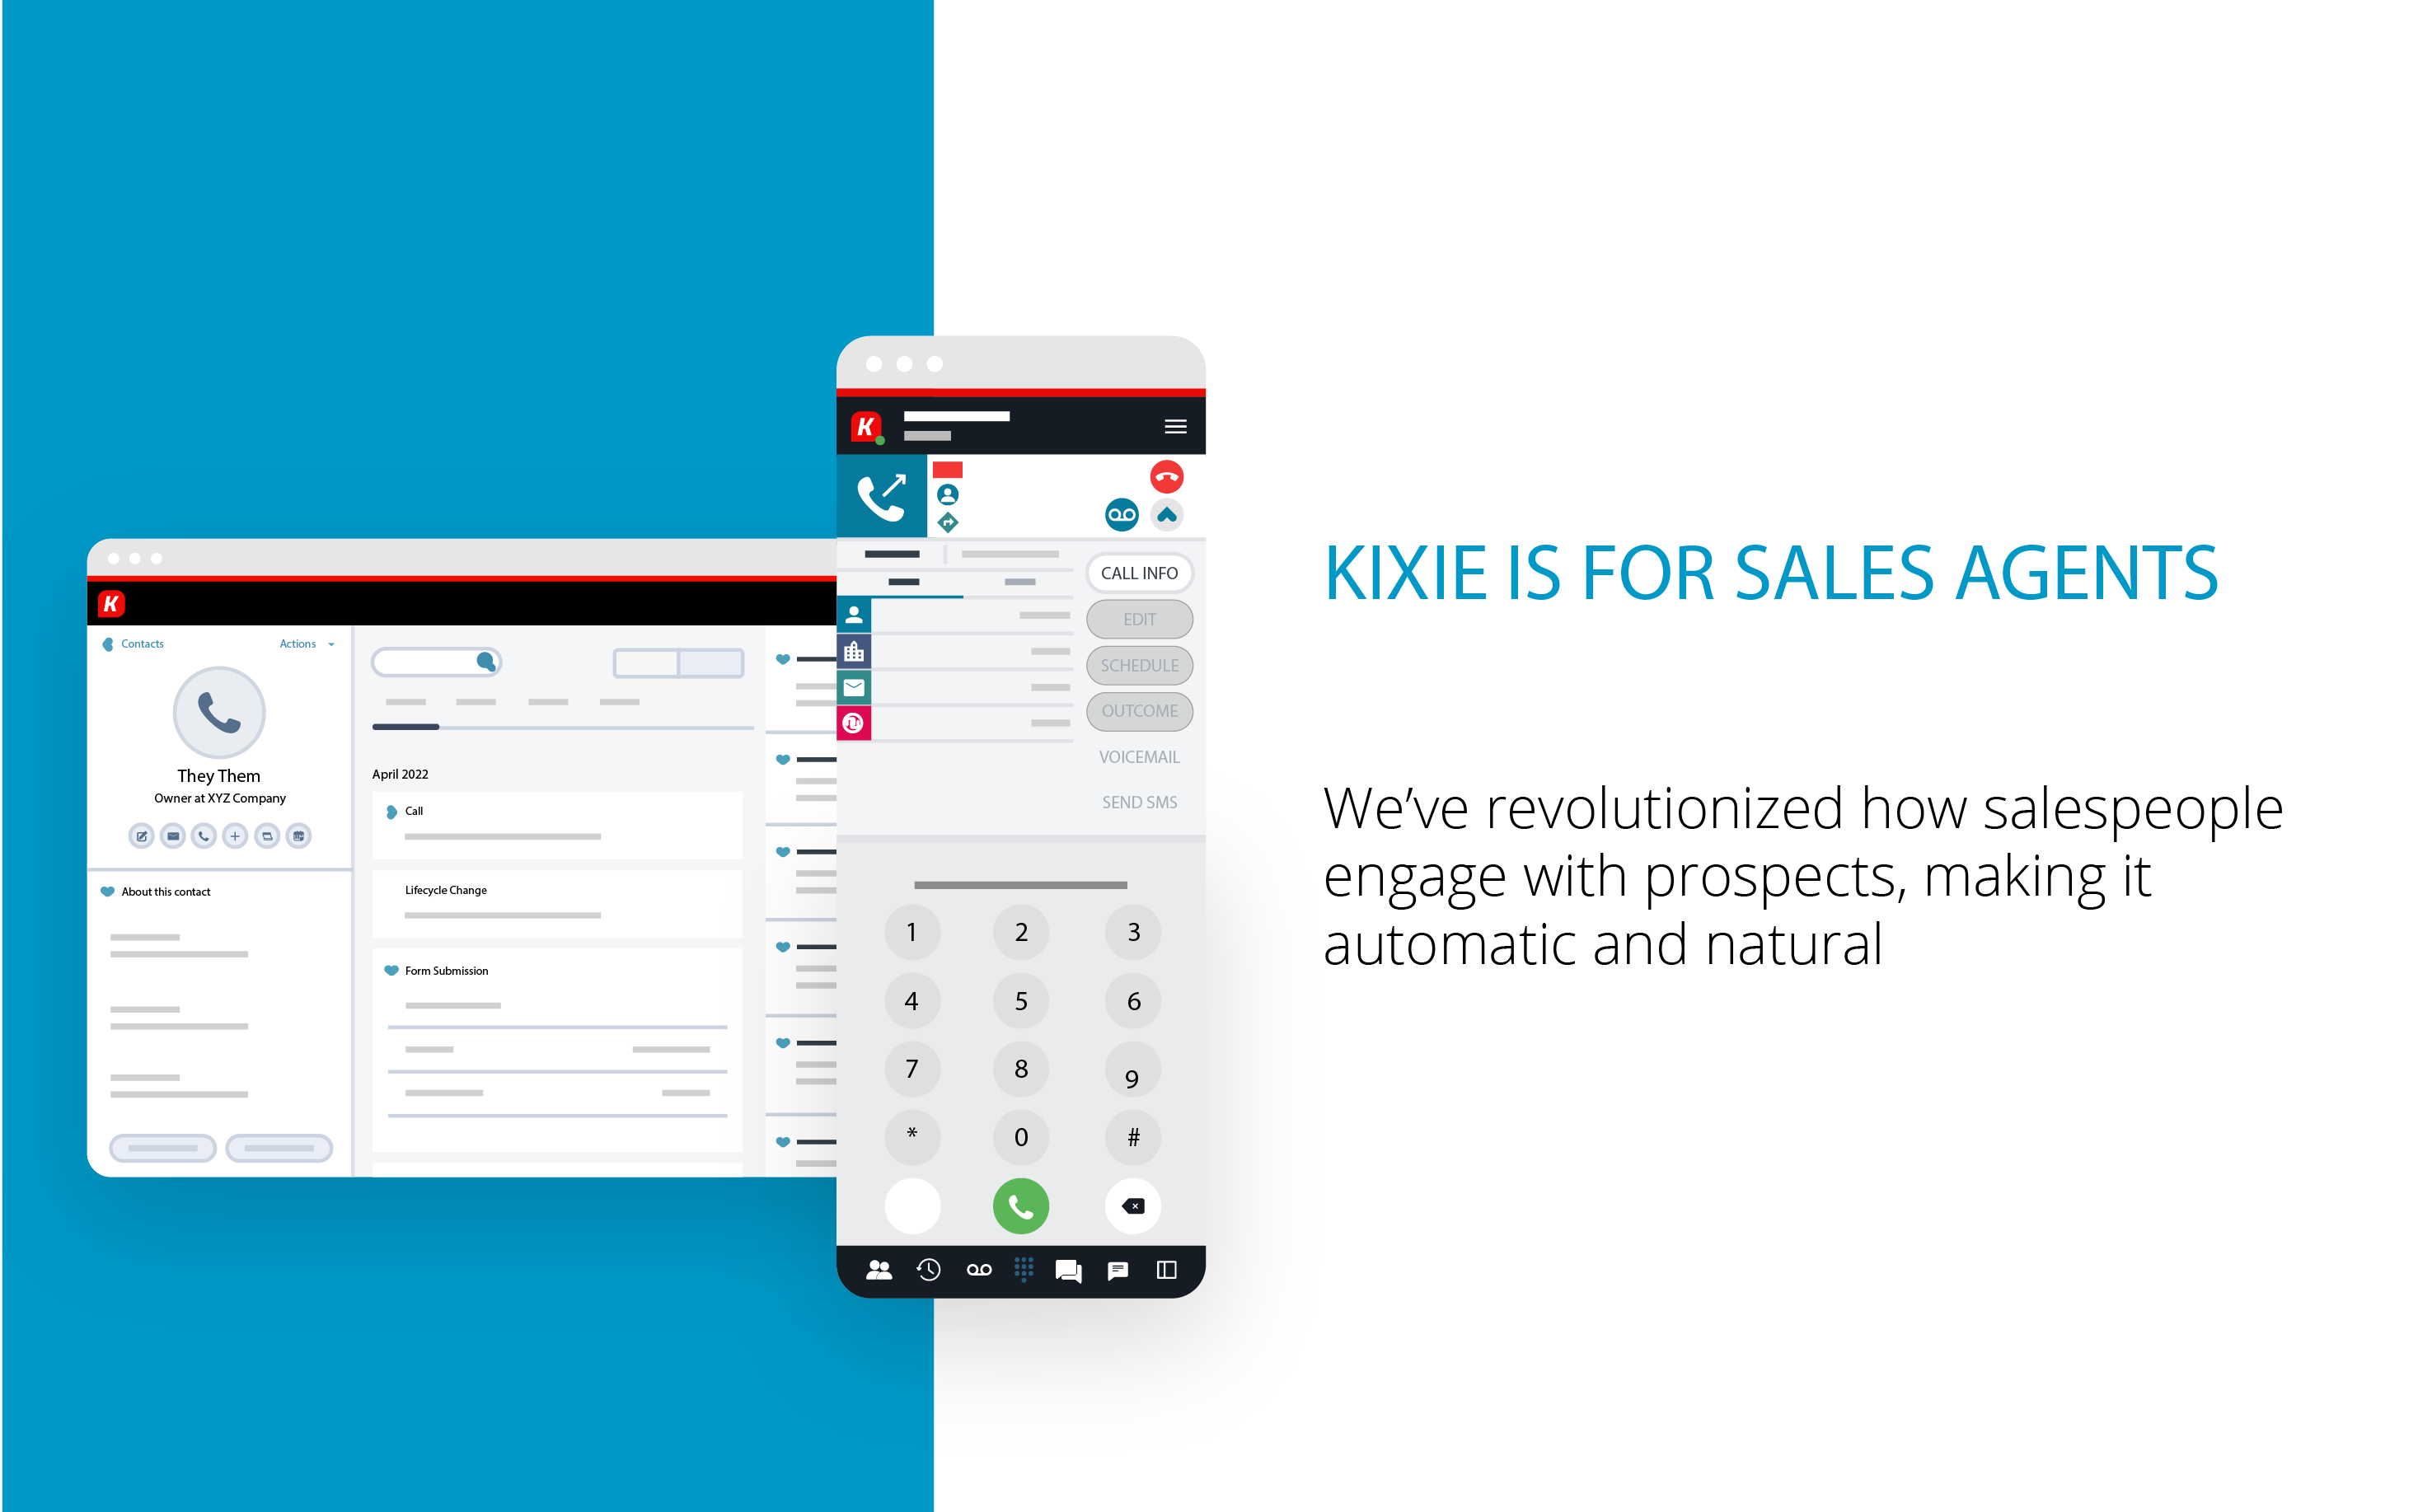 Built specifically for modern sales teams.